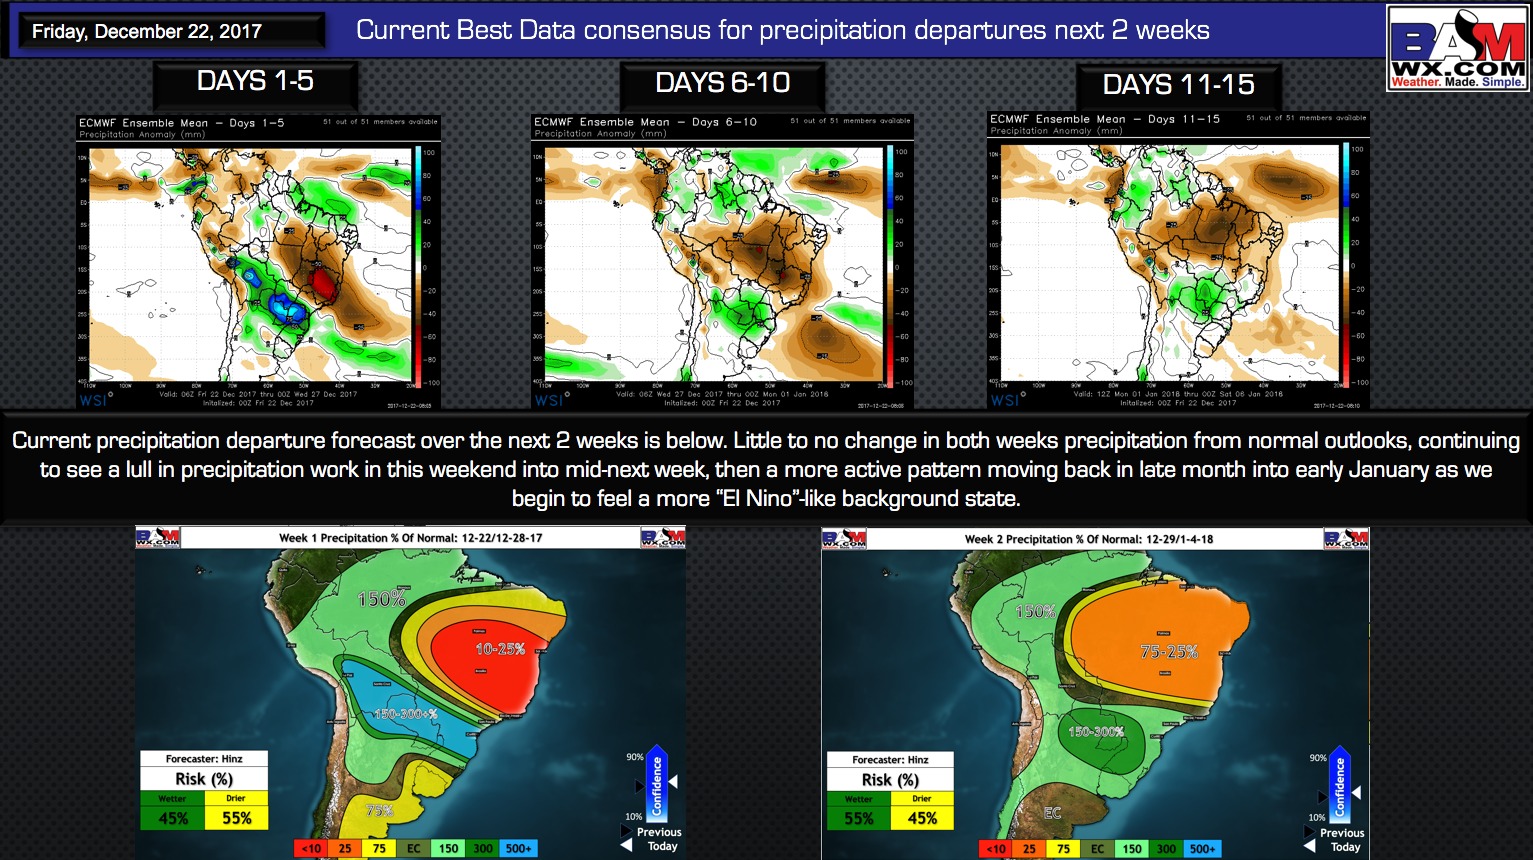 12-22-17 South America: Pattern reverting back to warmer/drier into late month…brief touch on long-range into Jan. K.